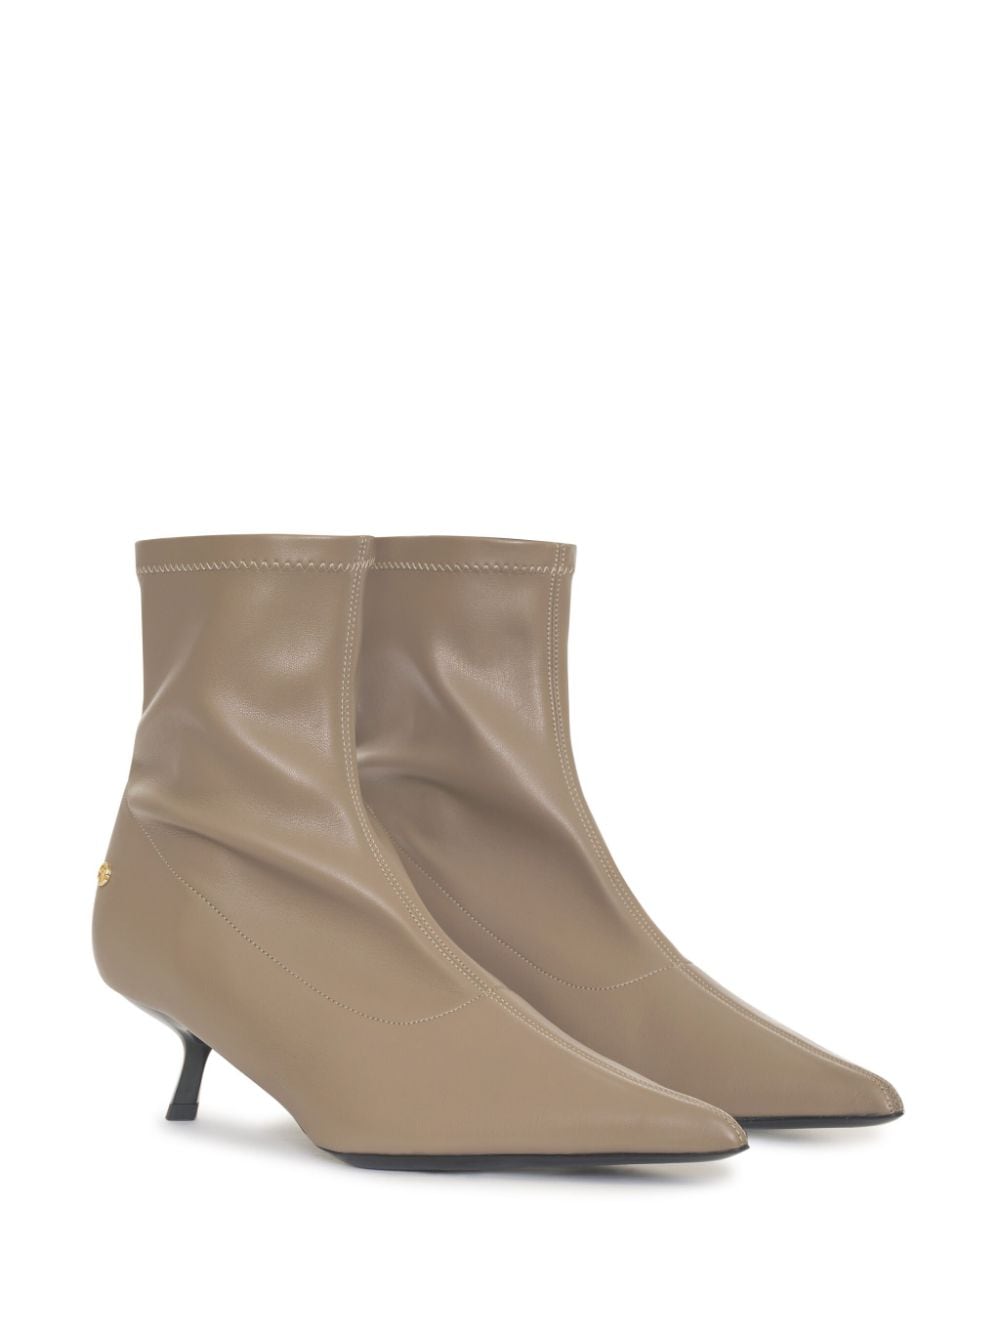 ANINE BING Hilda 50mm leather ankle boots - Beige